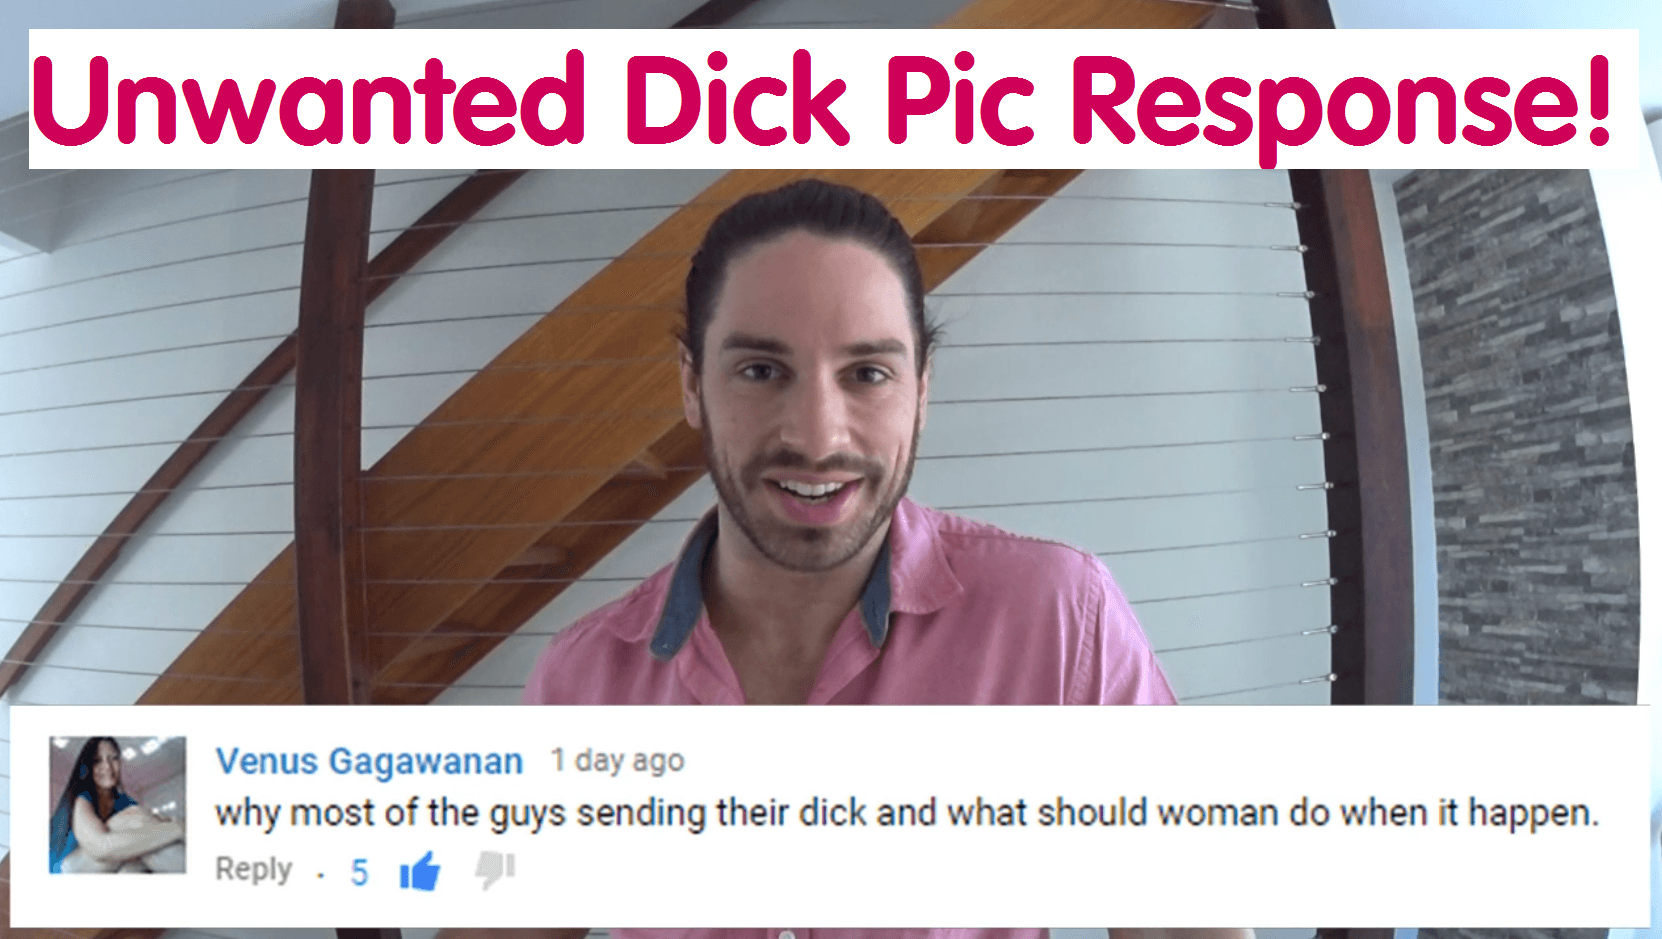 How To Respond To An Unwanted Dick Pic! – Ask Mark #14